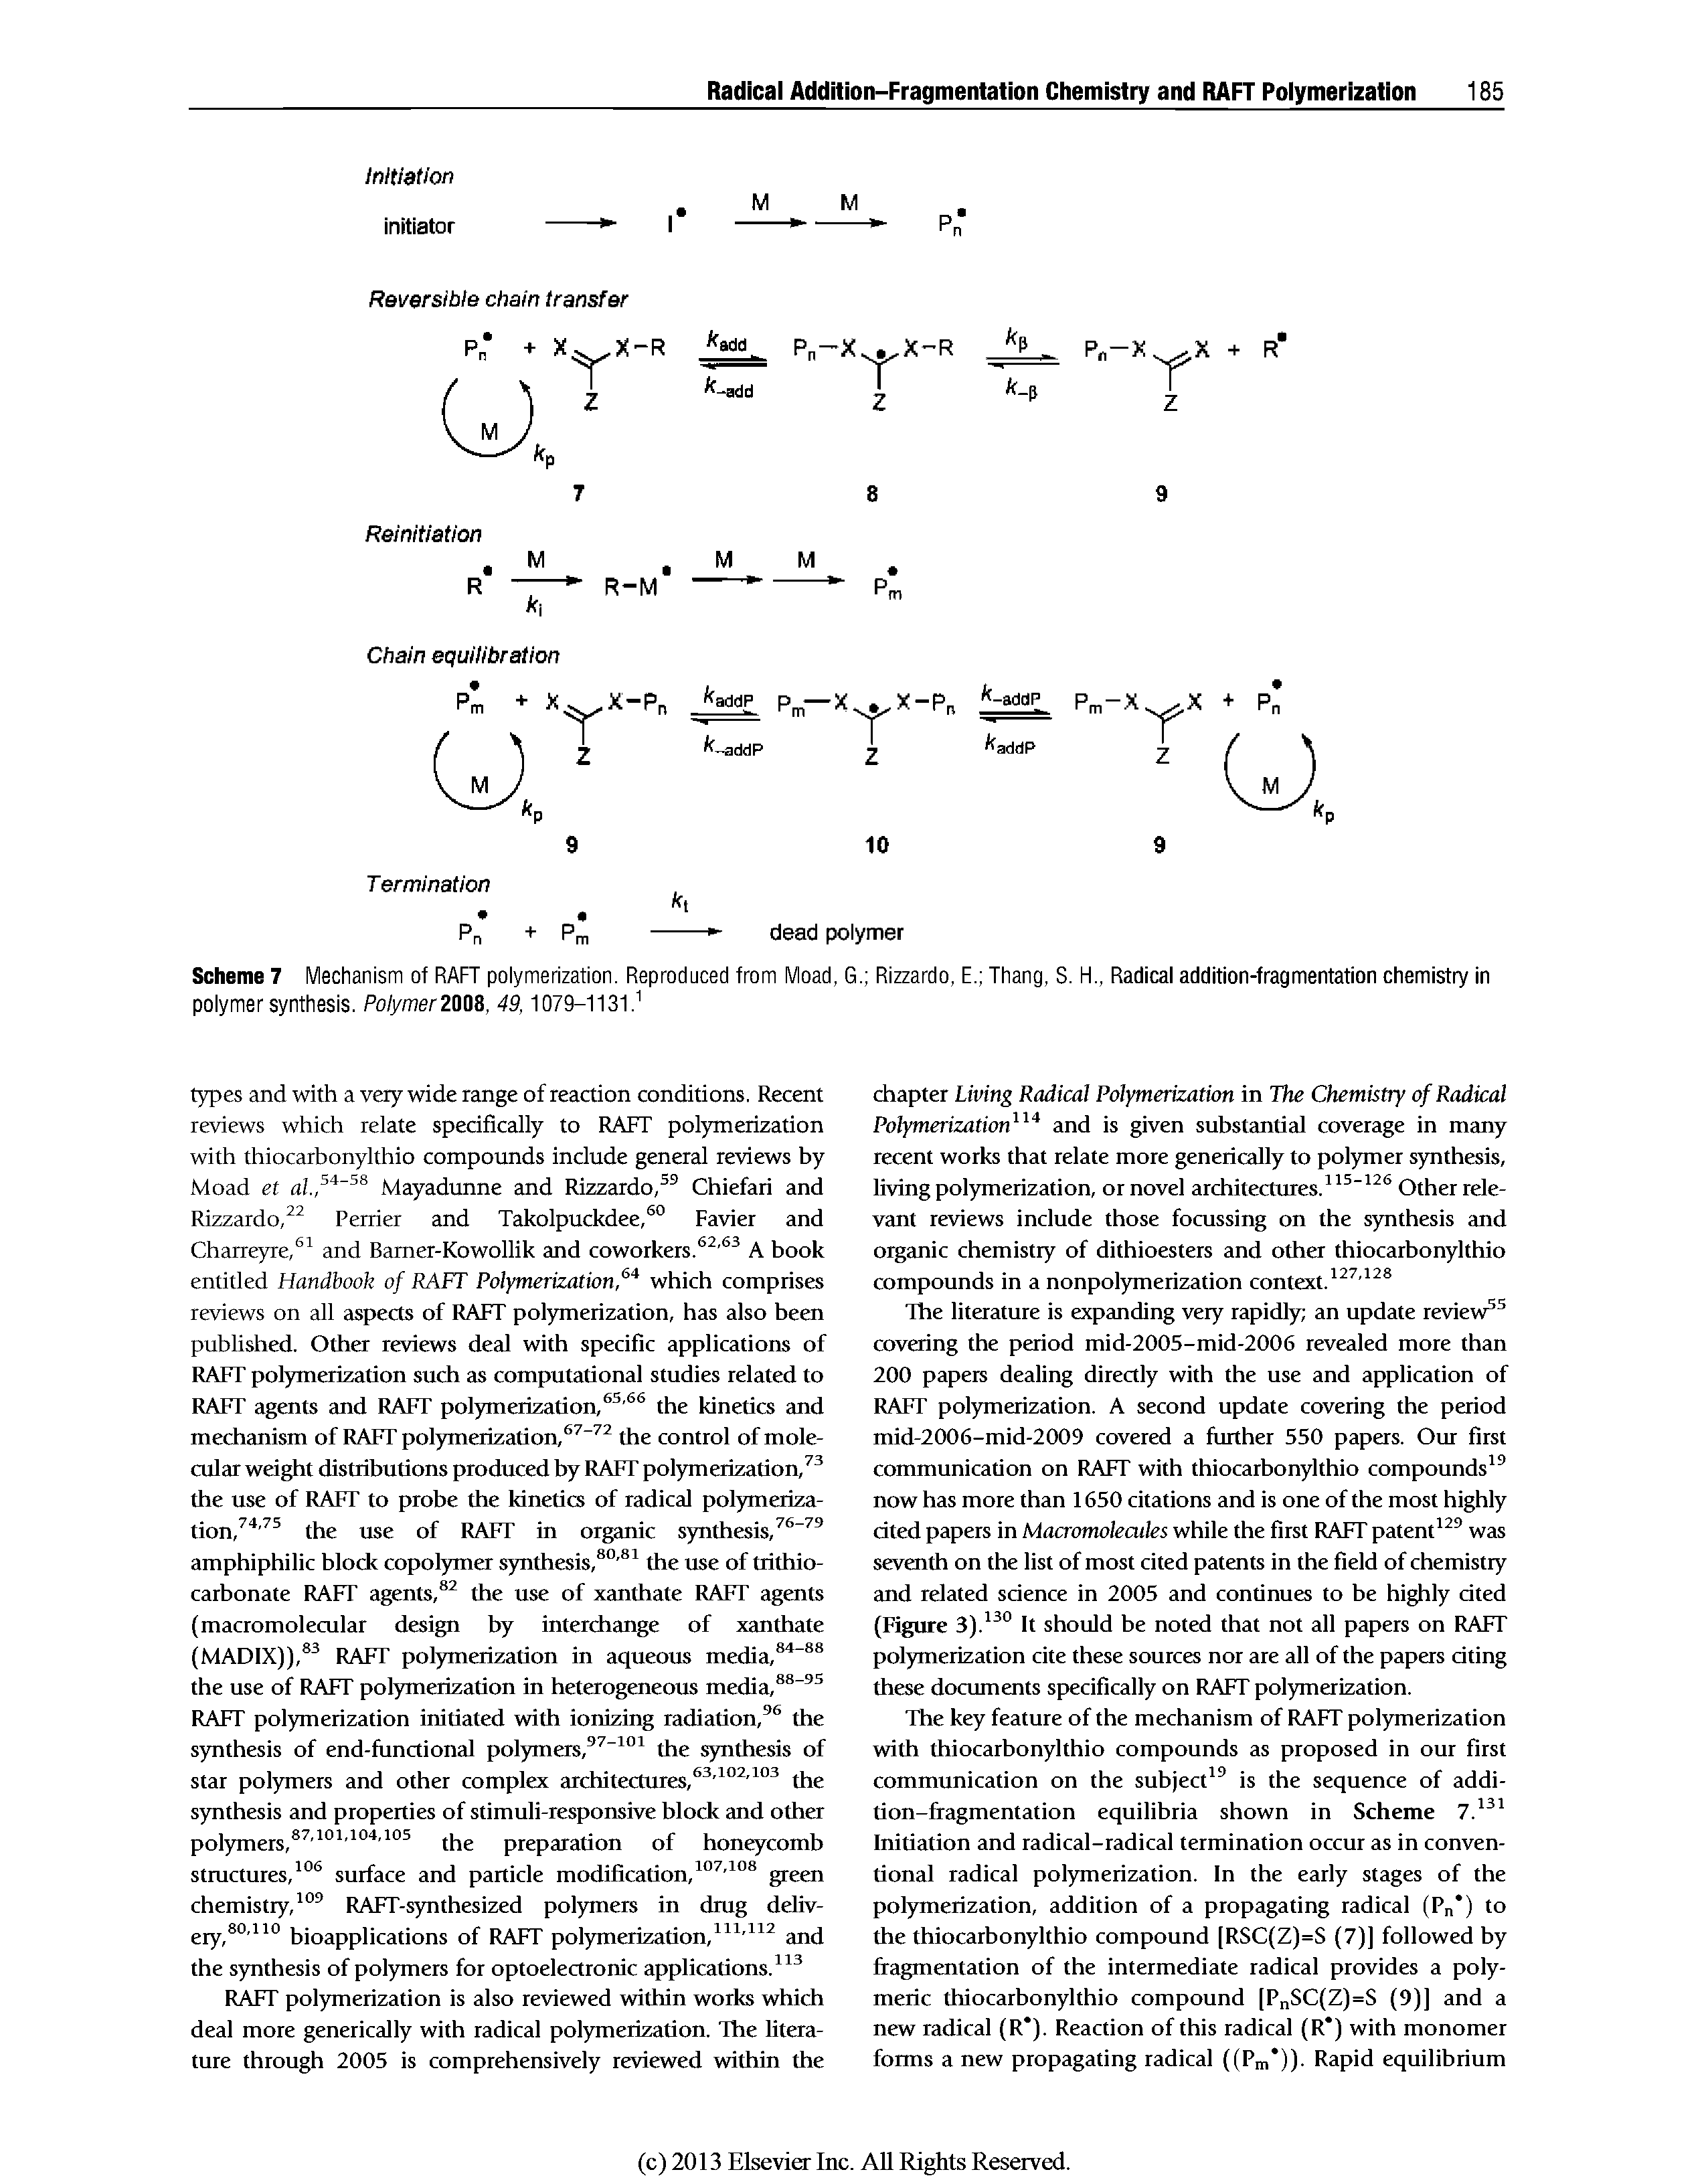 Scheme 7 Mechanism of RAF polymerization. Reproduced from Moad, G. Rizzardo, E. Thang, S. H., Radical addition-fragmentation chemistry in polymer synthesis. PolymerZOOi, 49,1079-1131. ...